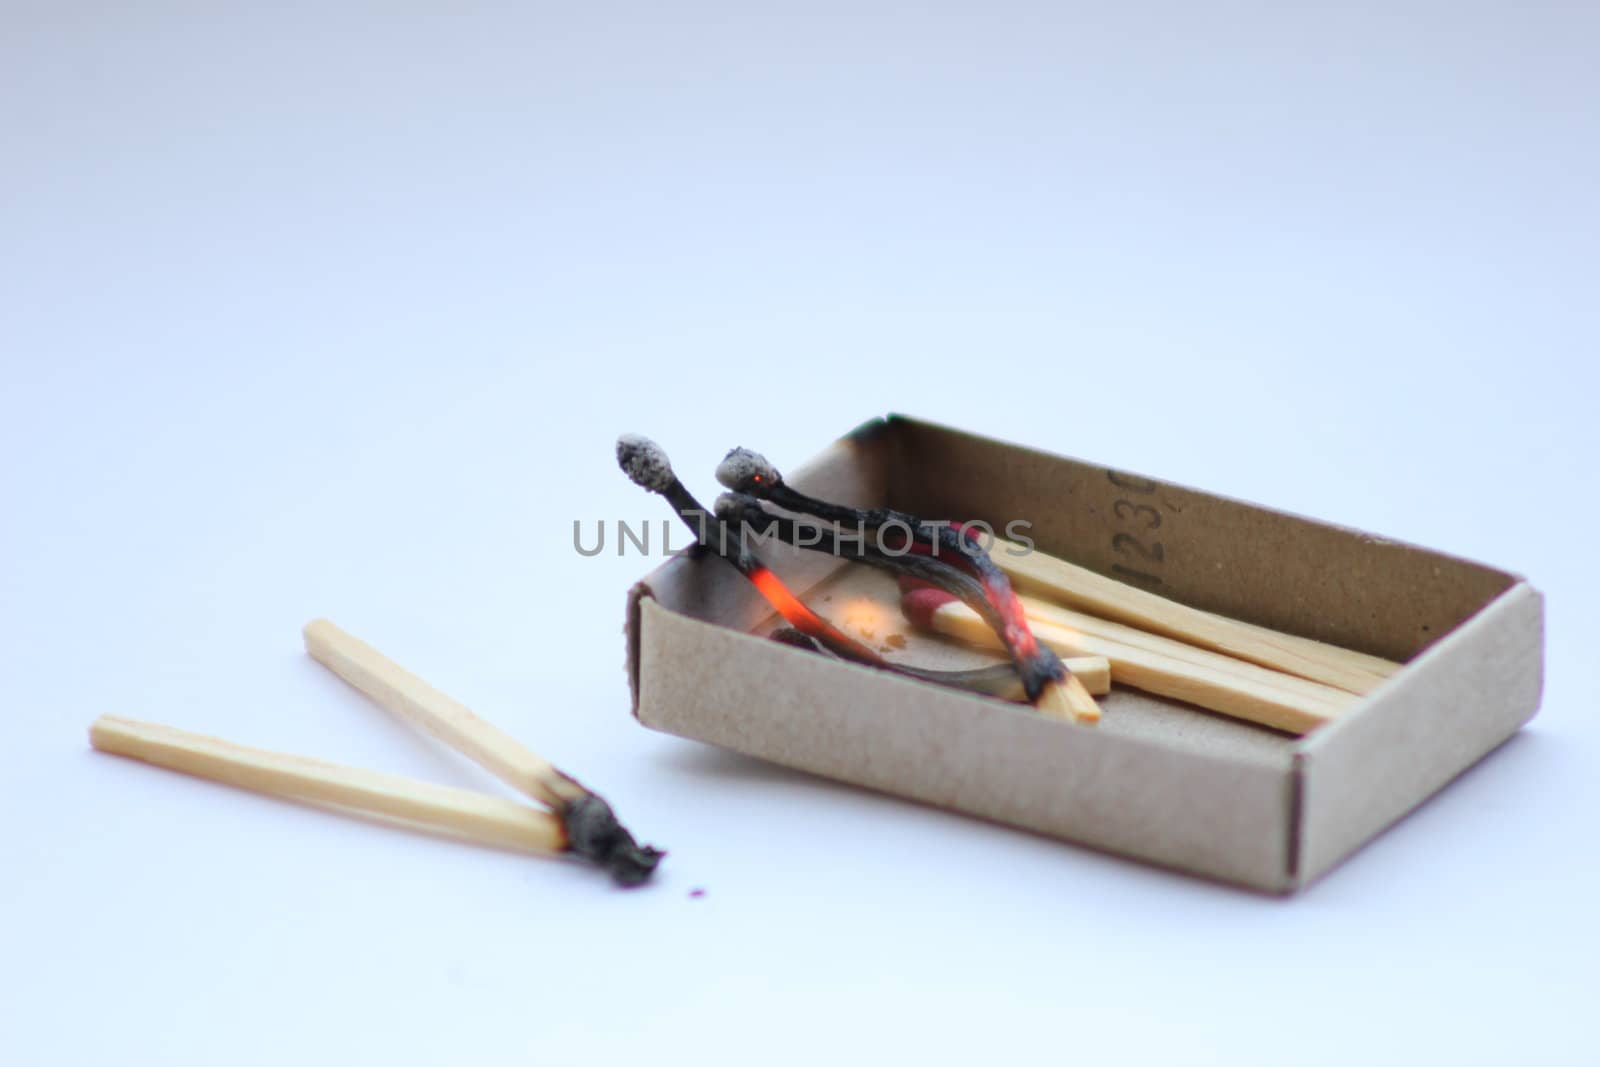 Burned Matches by abhbah05